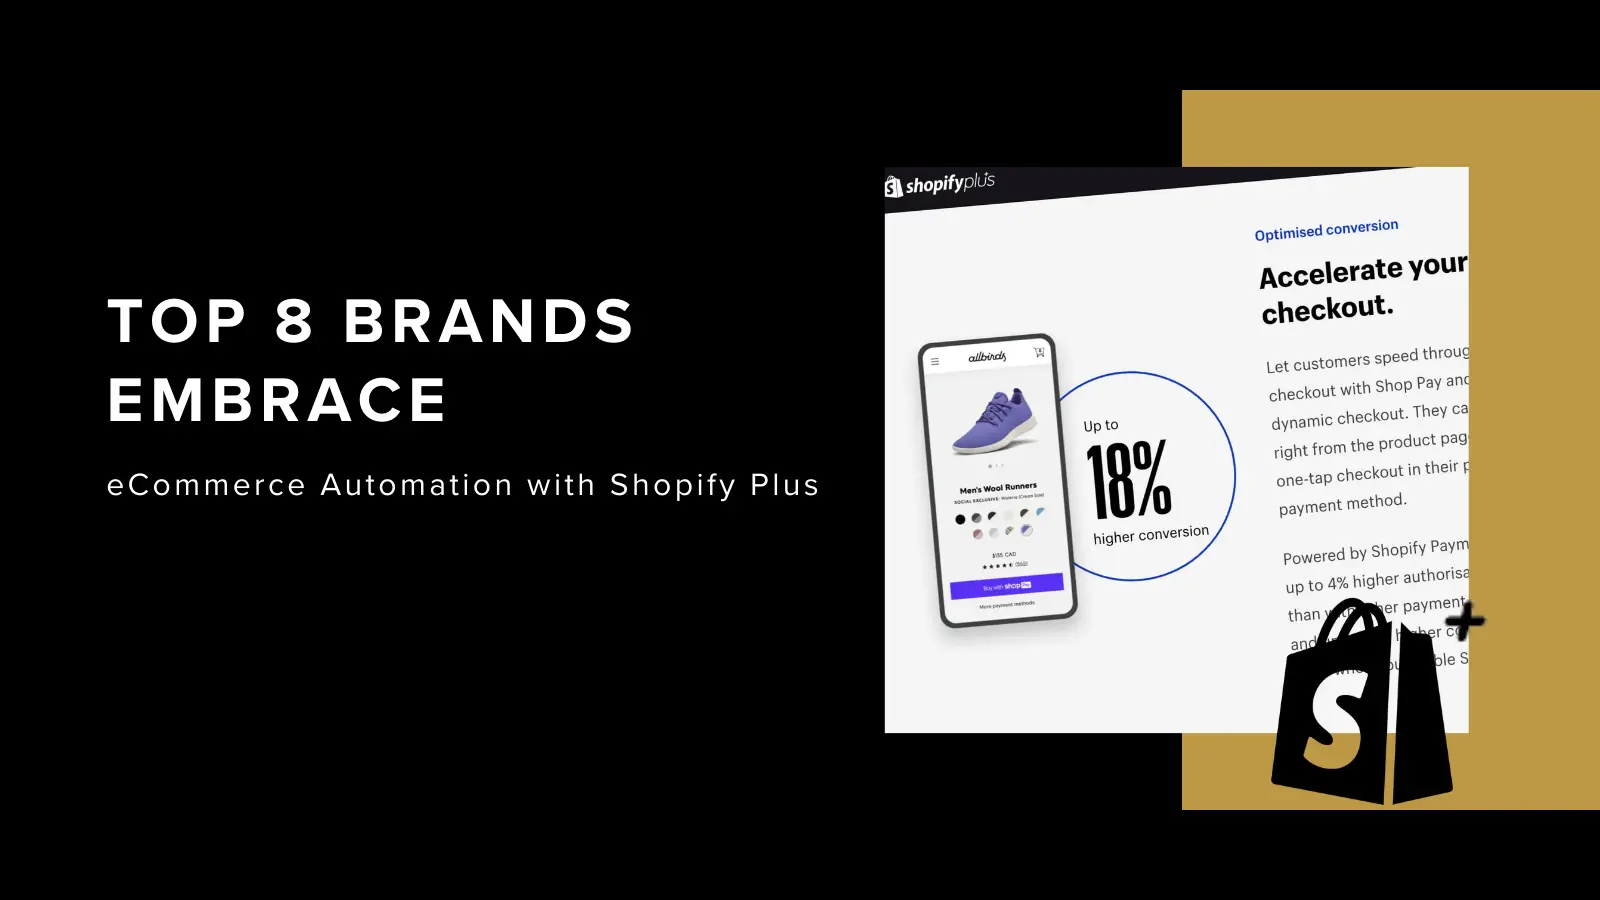 Top 8 Brands Embrace eCommerce Automation with Shopify Plus